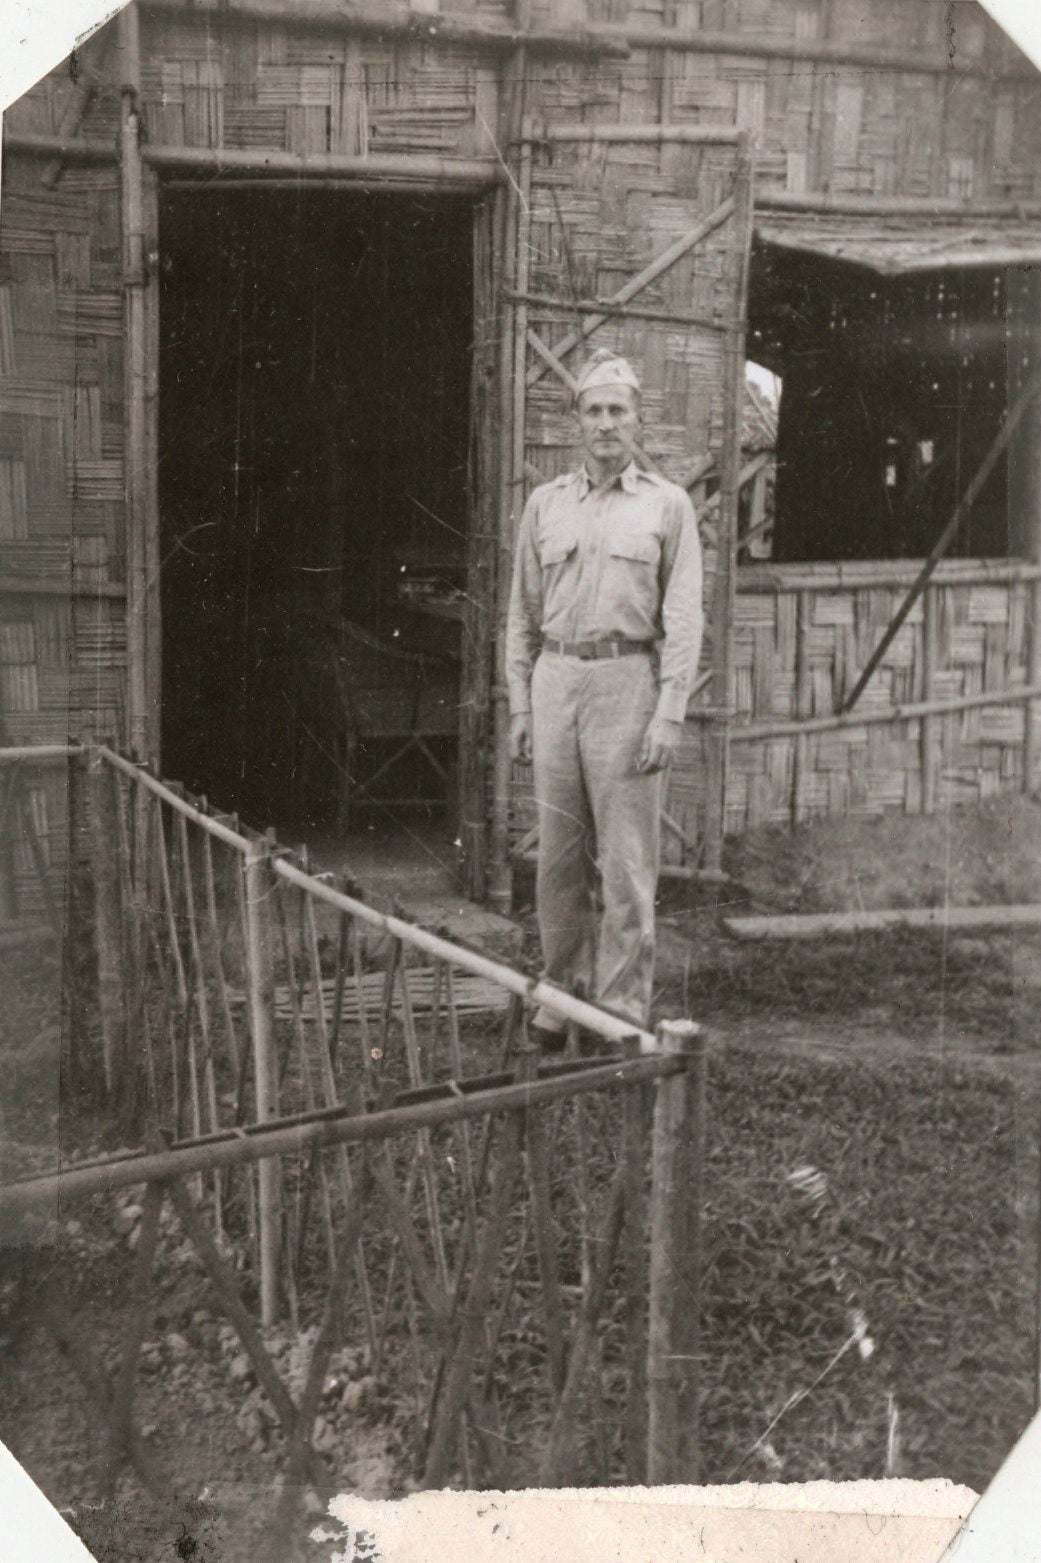 Father Louis Joseph Meyer, with the 20th General Hospital in Burma, c. 1943